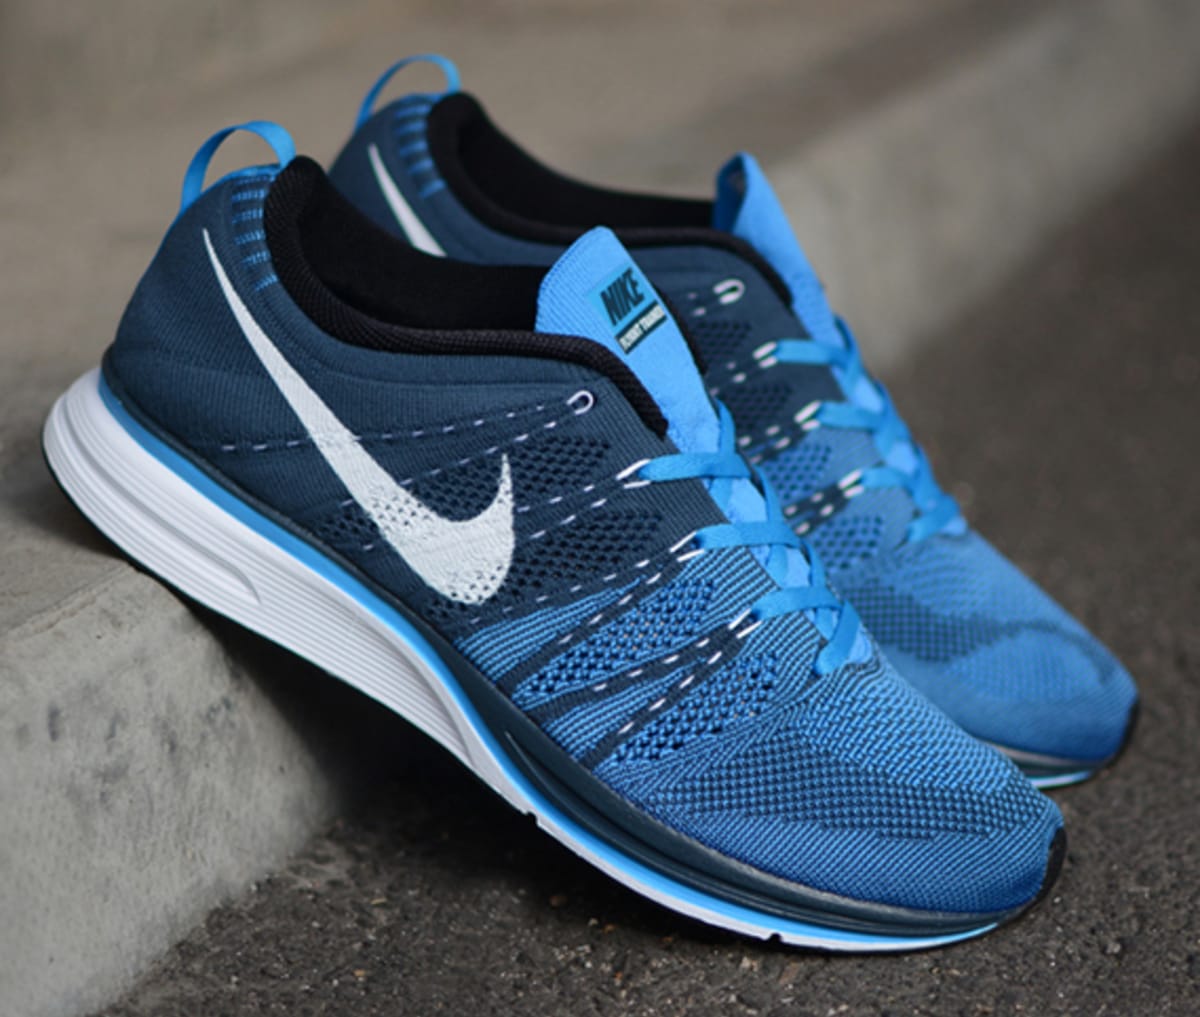 Nike Flyknit Trainer+ "Squadron Blue/Blue Glow" | Complex
